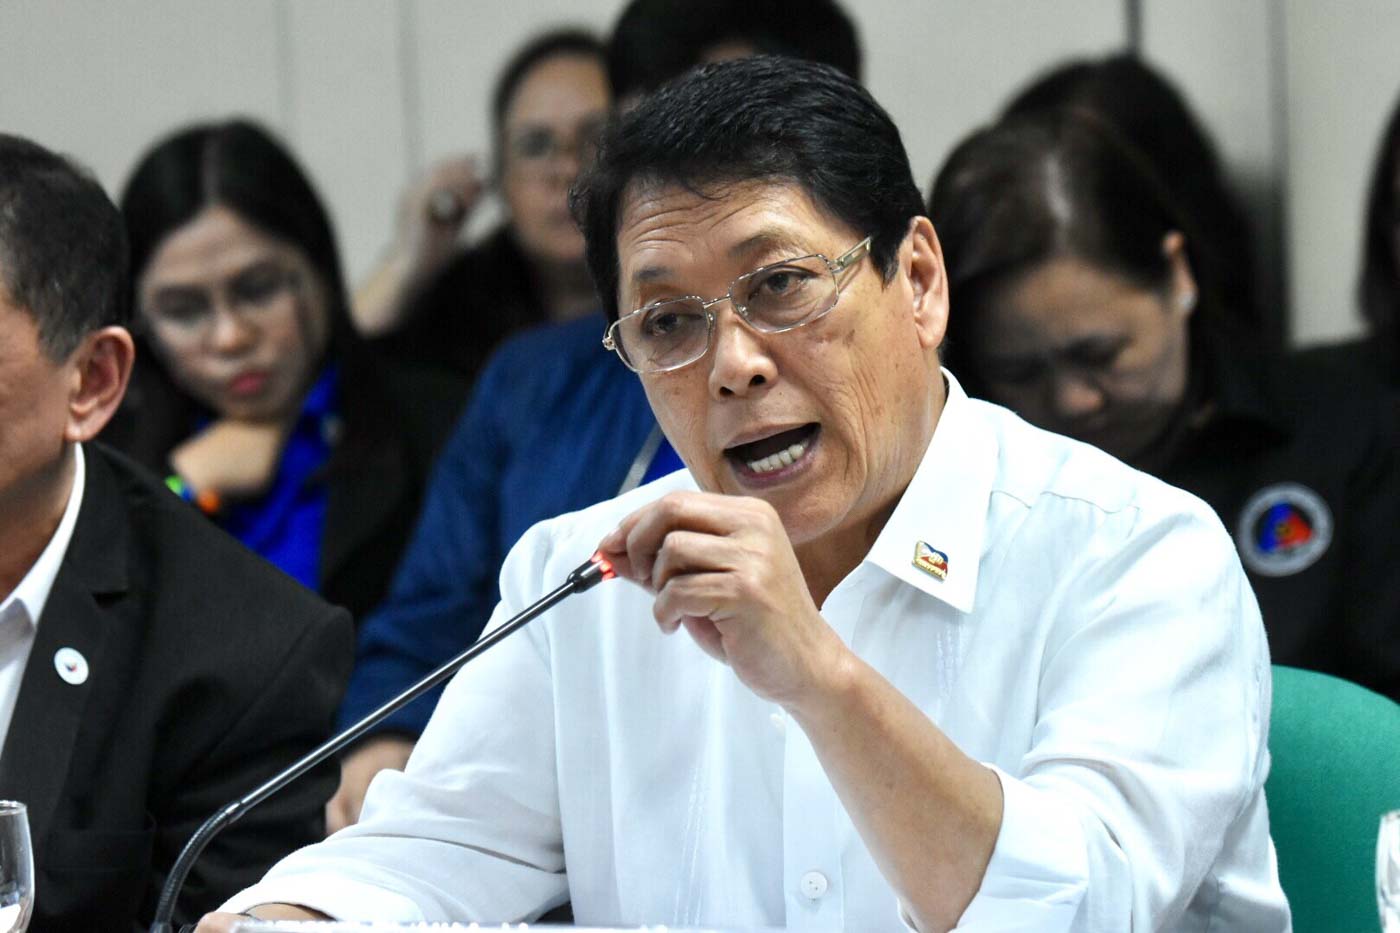 REPATRIATION. Labor Secretary Silvestre Bello III says Filipinos repatriated from the Middle East may be sent to other countries to work instead. File photo by Angie de Silva/Rappler 